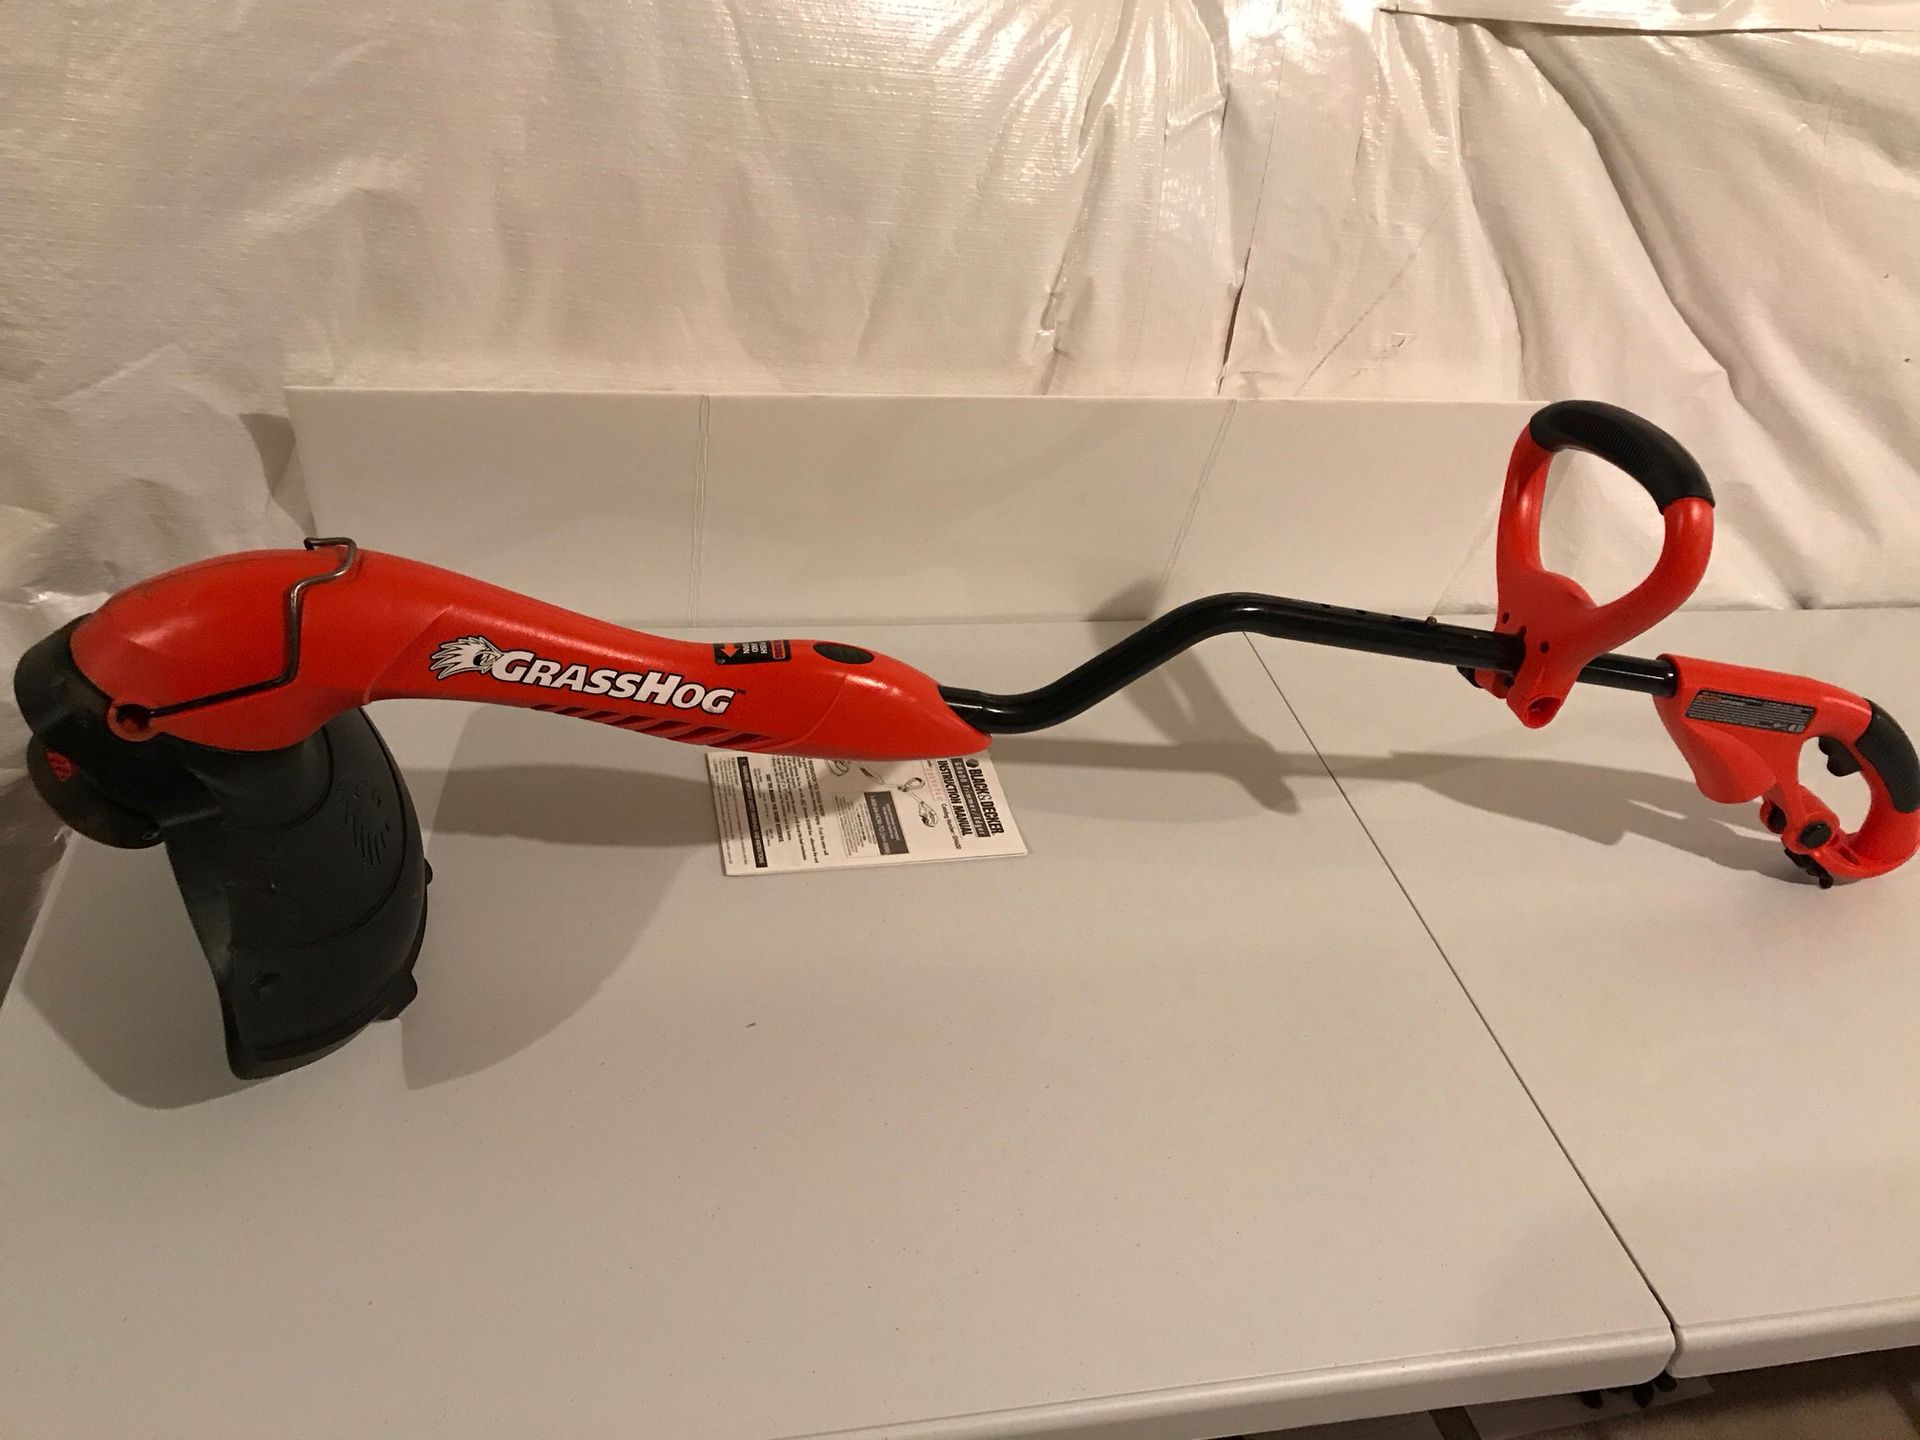 Black & Decker Gh600 Grass Hog 14-inch 5.5 Amp Electric String Trimmer and  Edger for Sale in Naperville, IL - OfferUp